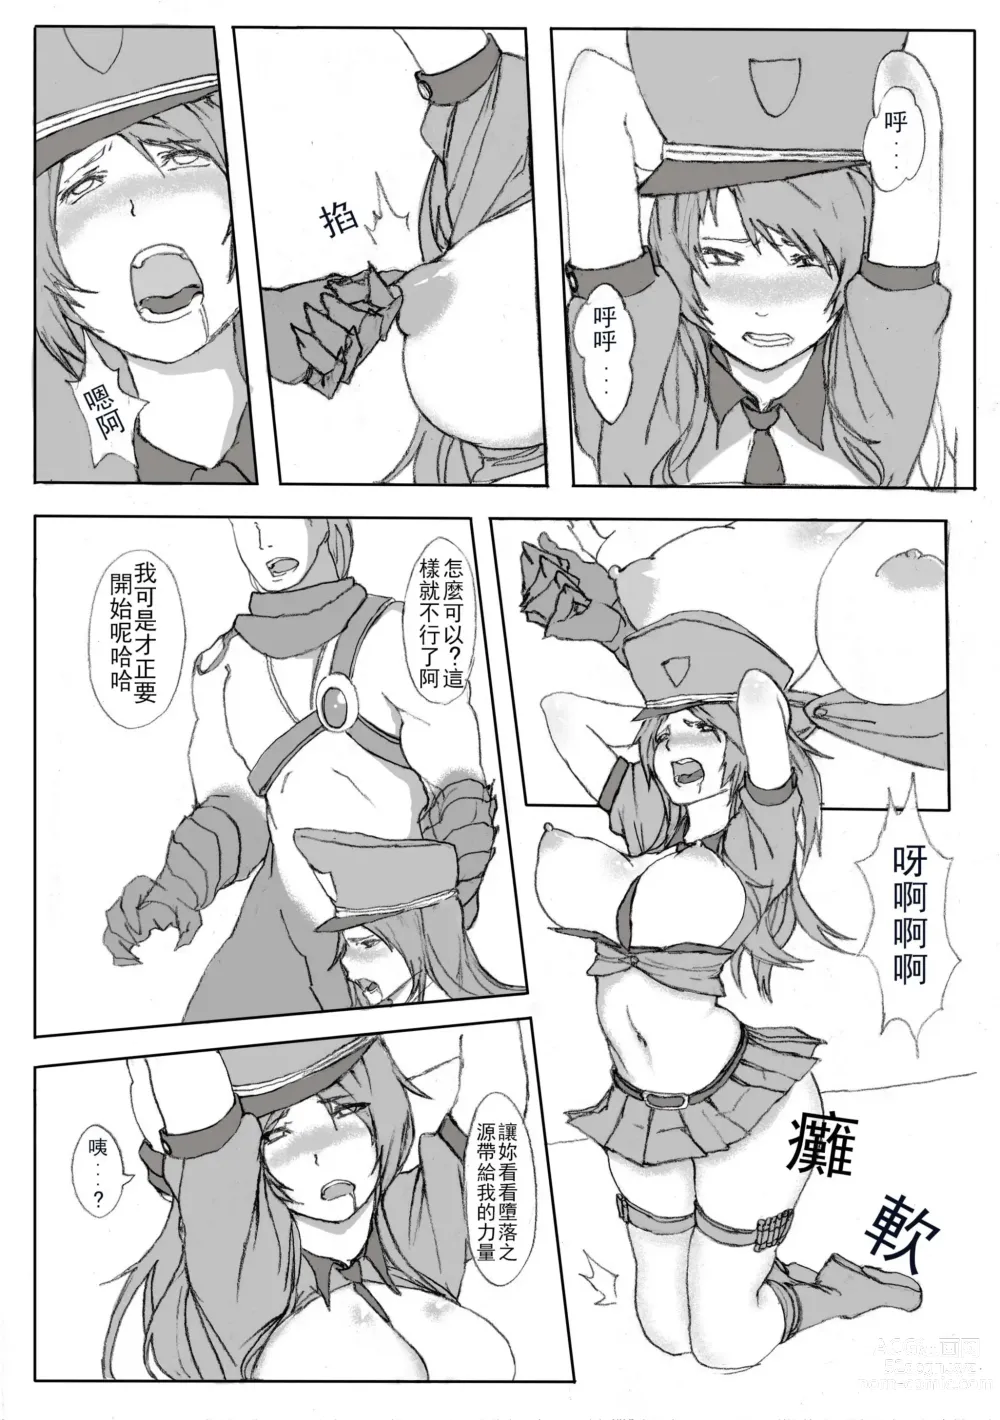 Page 6 of doujinshi 凱特琳壞壞 (League of Legends) [無修正]中文